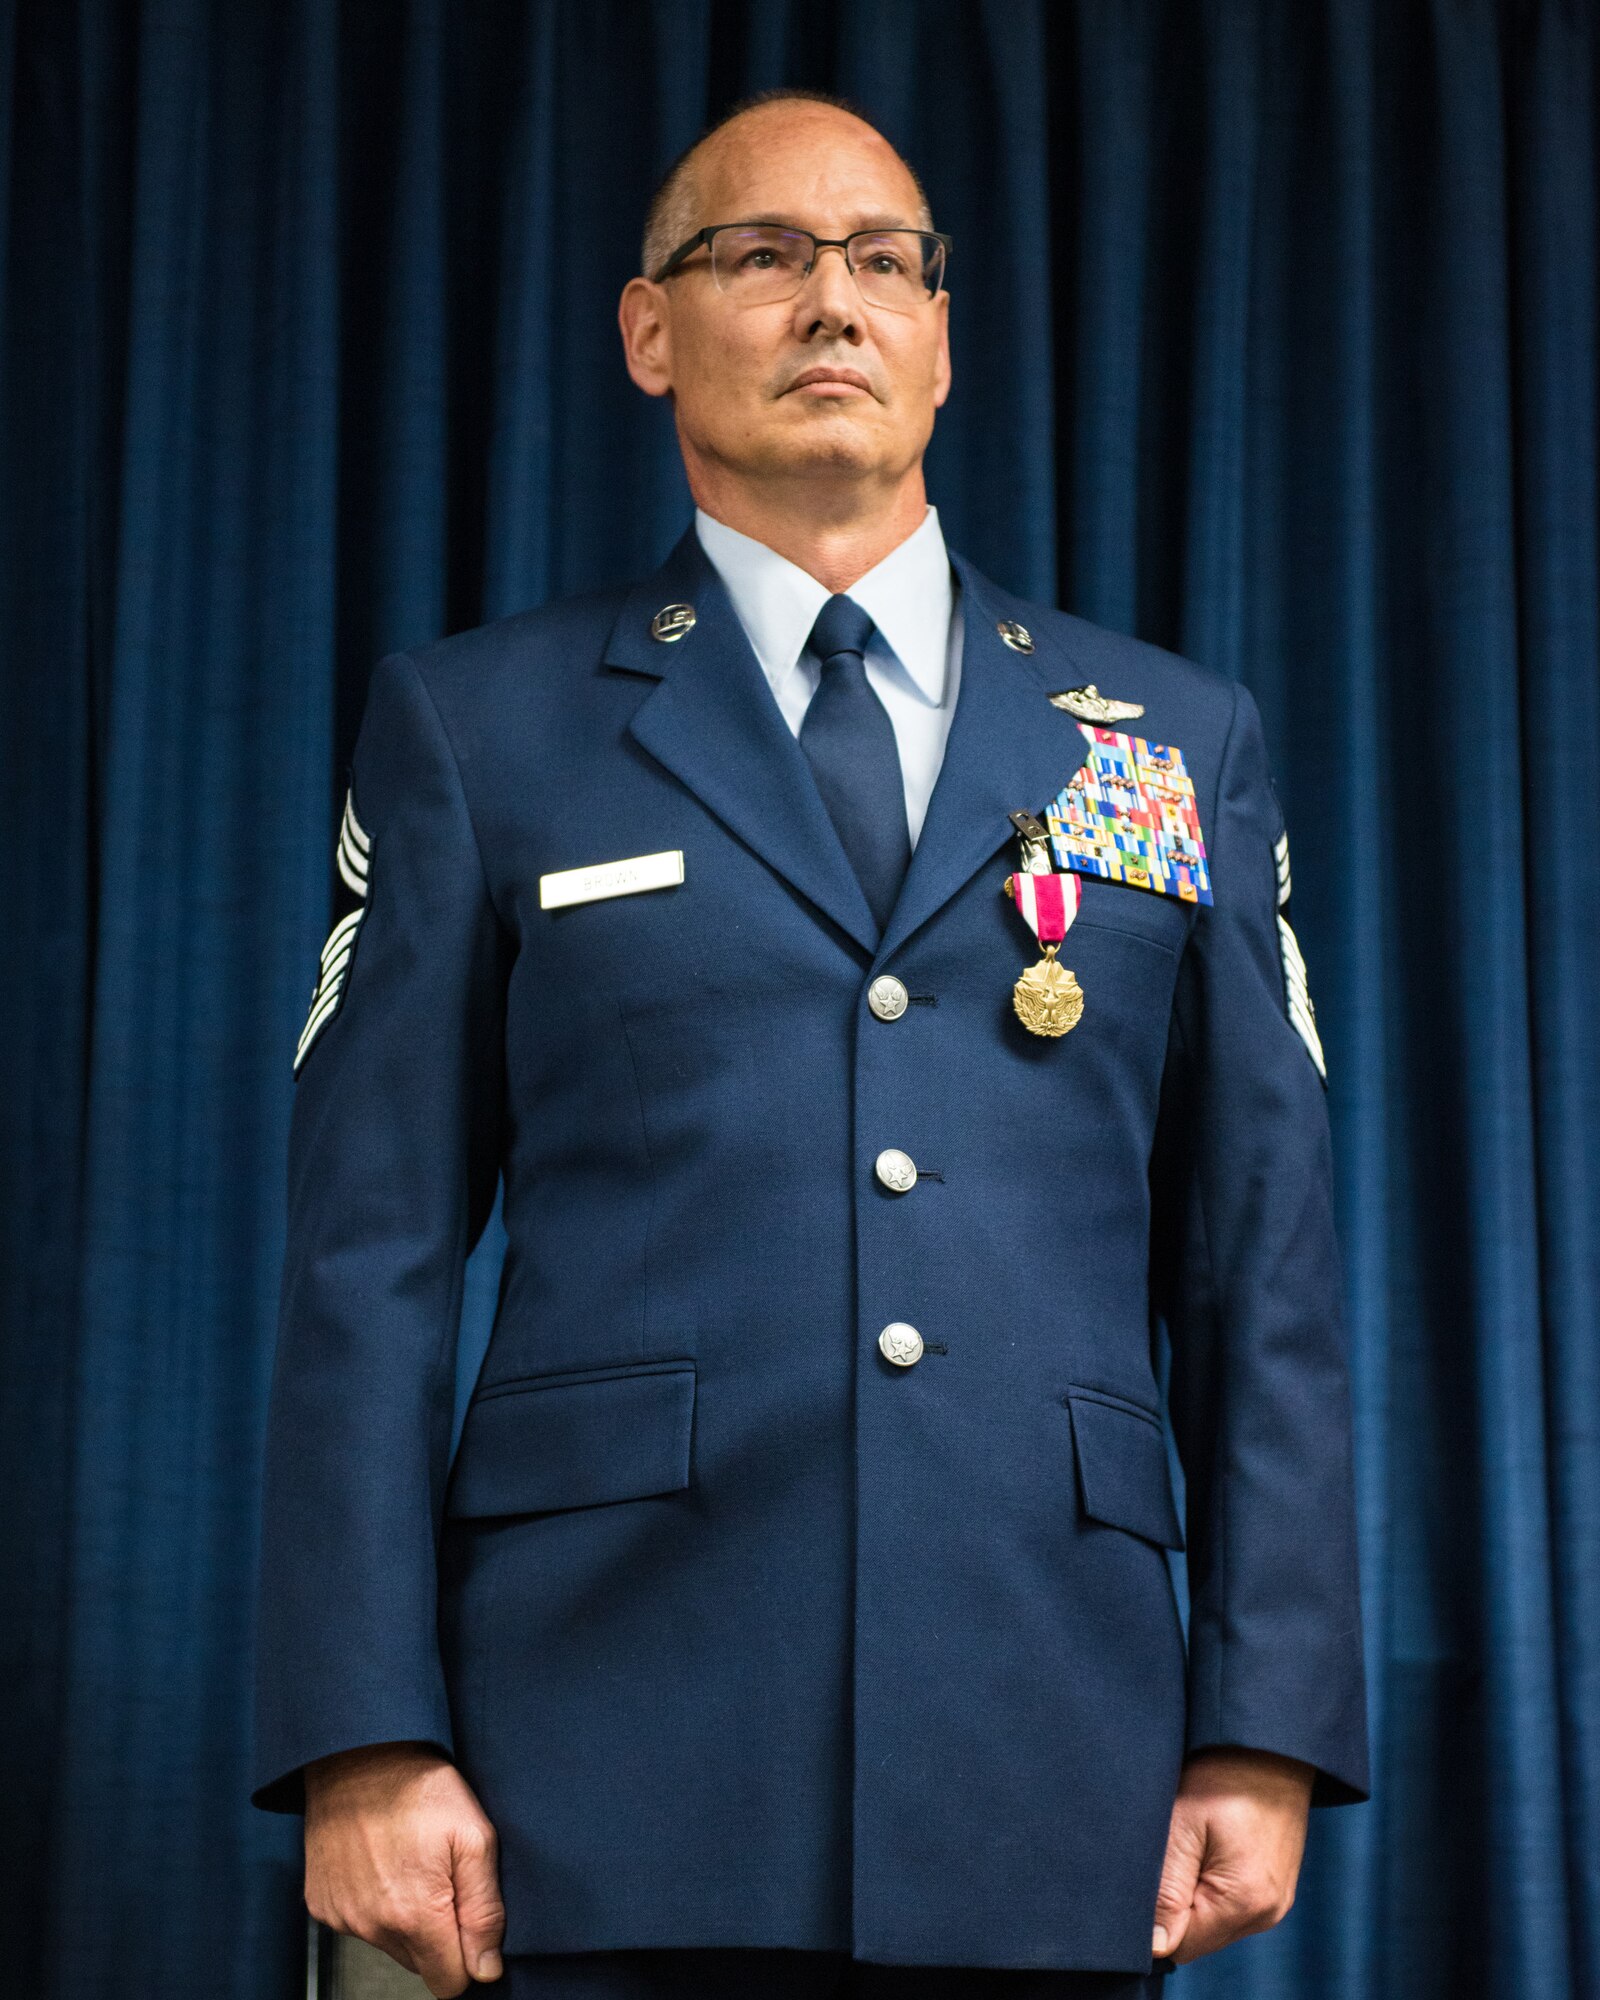 Chief Master Sgt. Jeffrey Brown, a loadmaster supervisor with the 165th Airlift Squadron, retires from 38 years of military service during a ceremony at the Kentucky Air National Guard Base in Louisville, Ky., Dec. 7, 2019. (U.S. Air National Guard photo by Senior Airman Chloe Ochs)